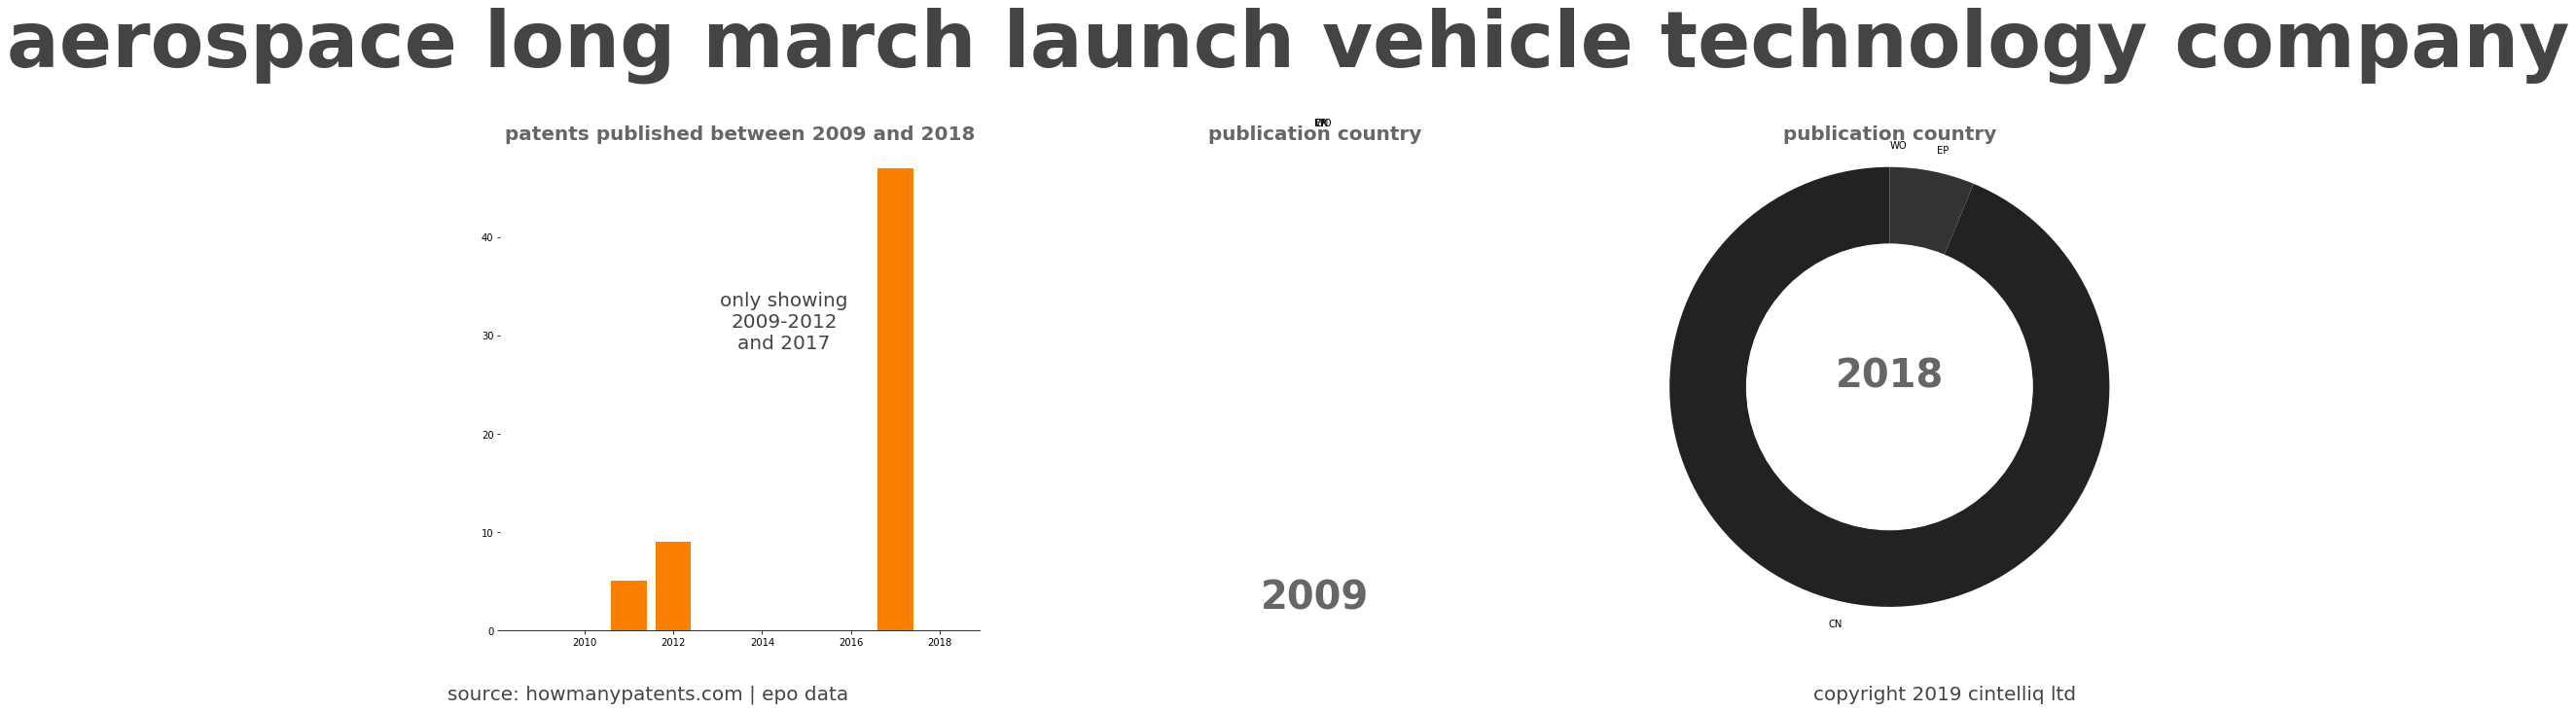 summary of patents for Aerospace Long March Launch Vehicle Technology Company